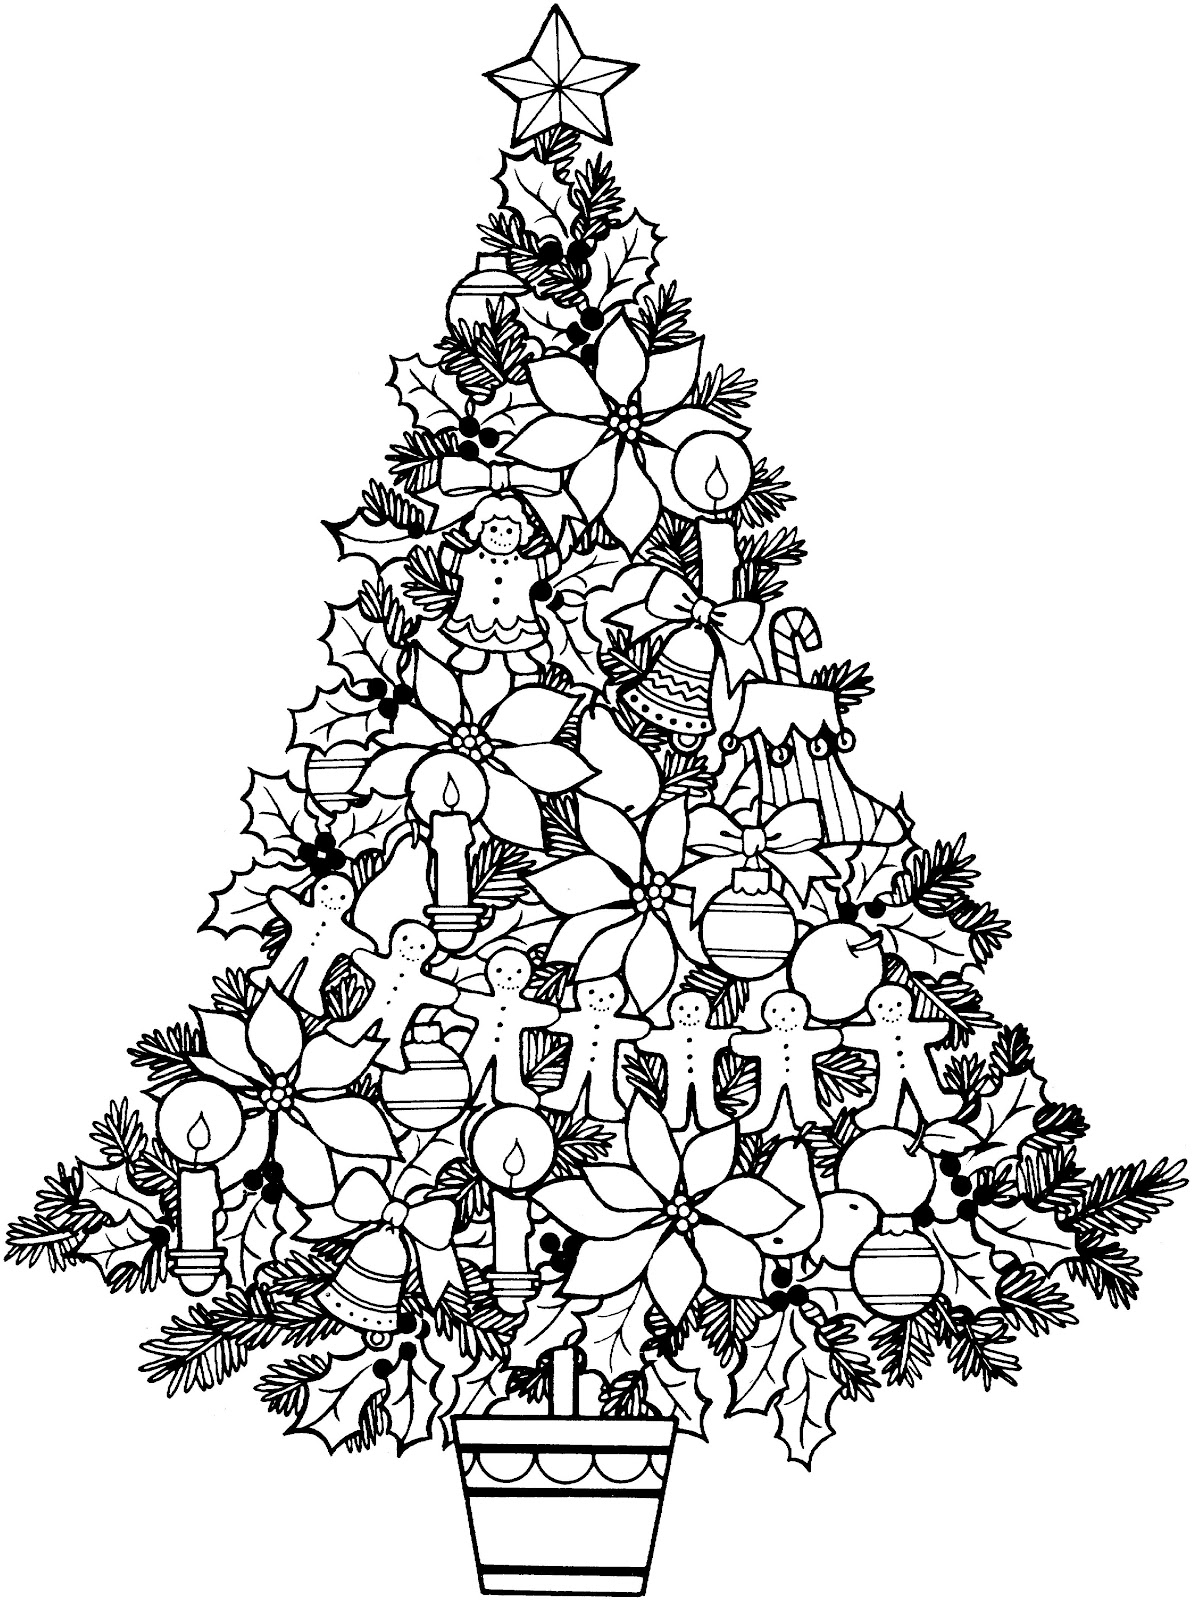 Christmas tree black and white christmas black and white clipart - WikiClipArt